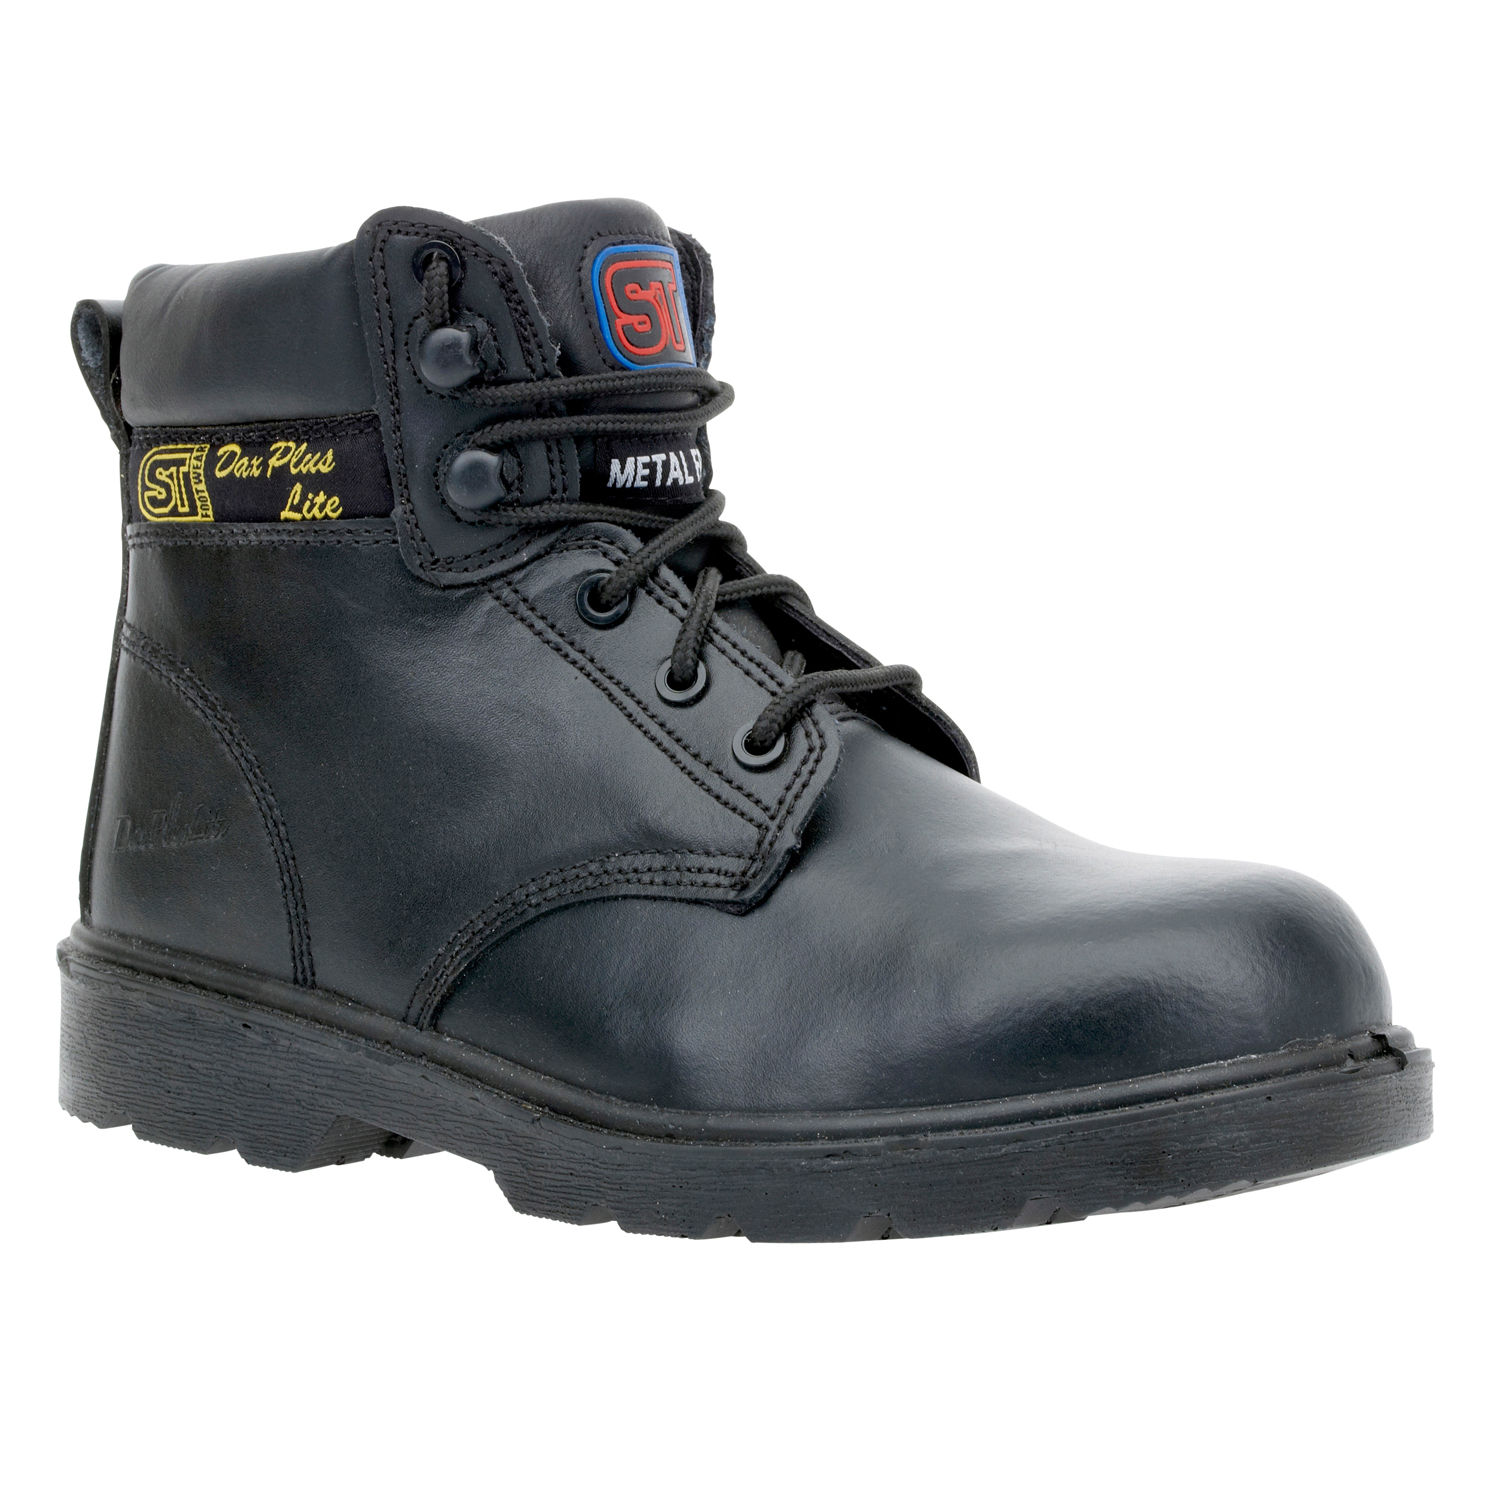 Supertouch S1P Dax Plus Lite Safety Boot -Size 13